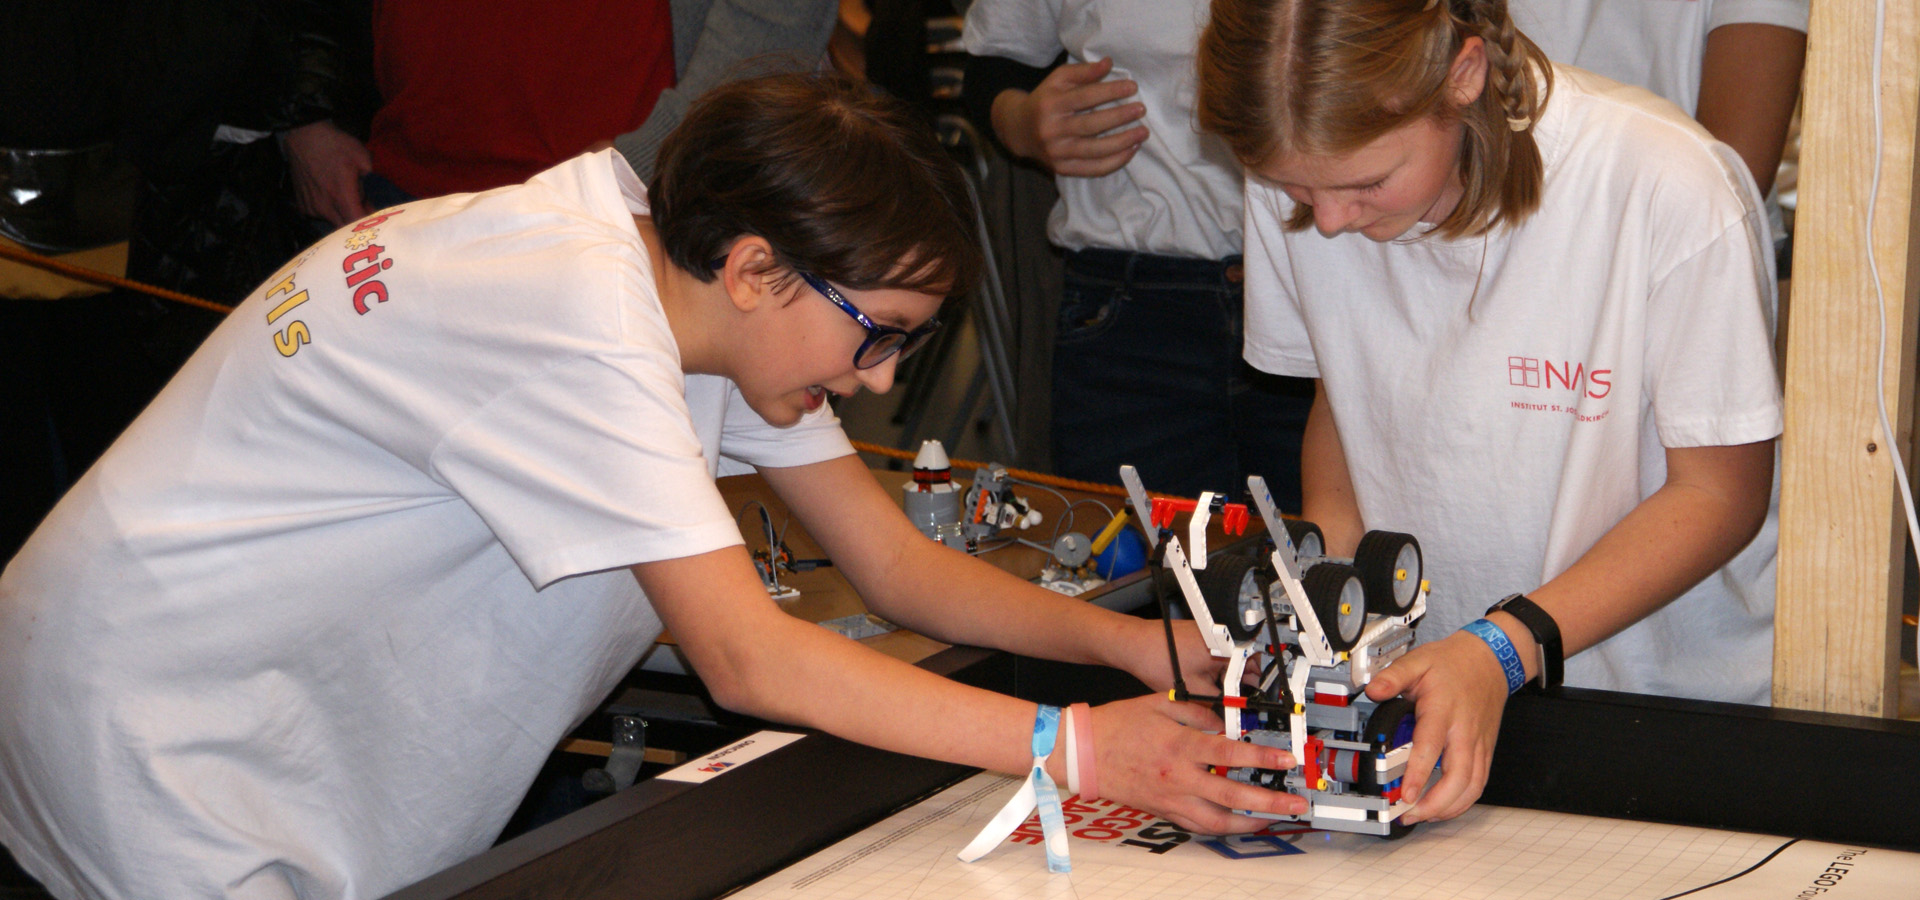 Final of the FIRST® LEGO® League to be held for the first time at Bregenz Festival House